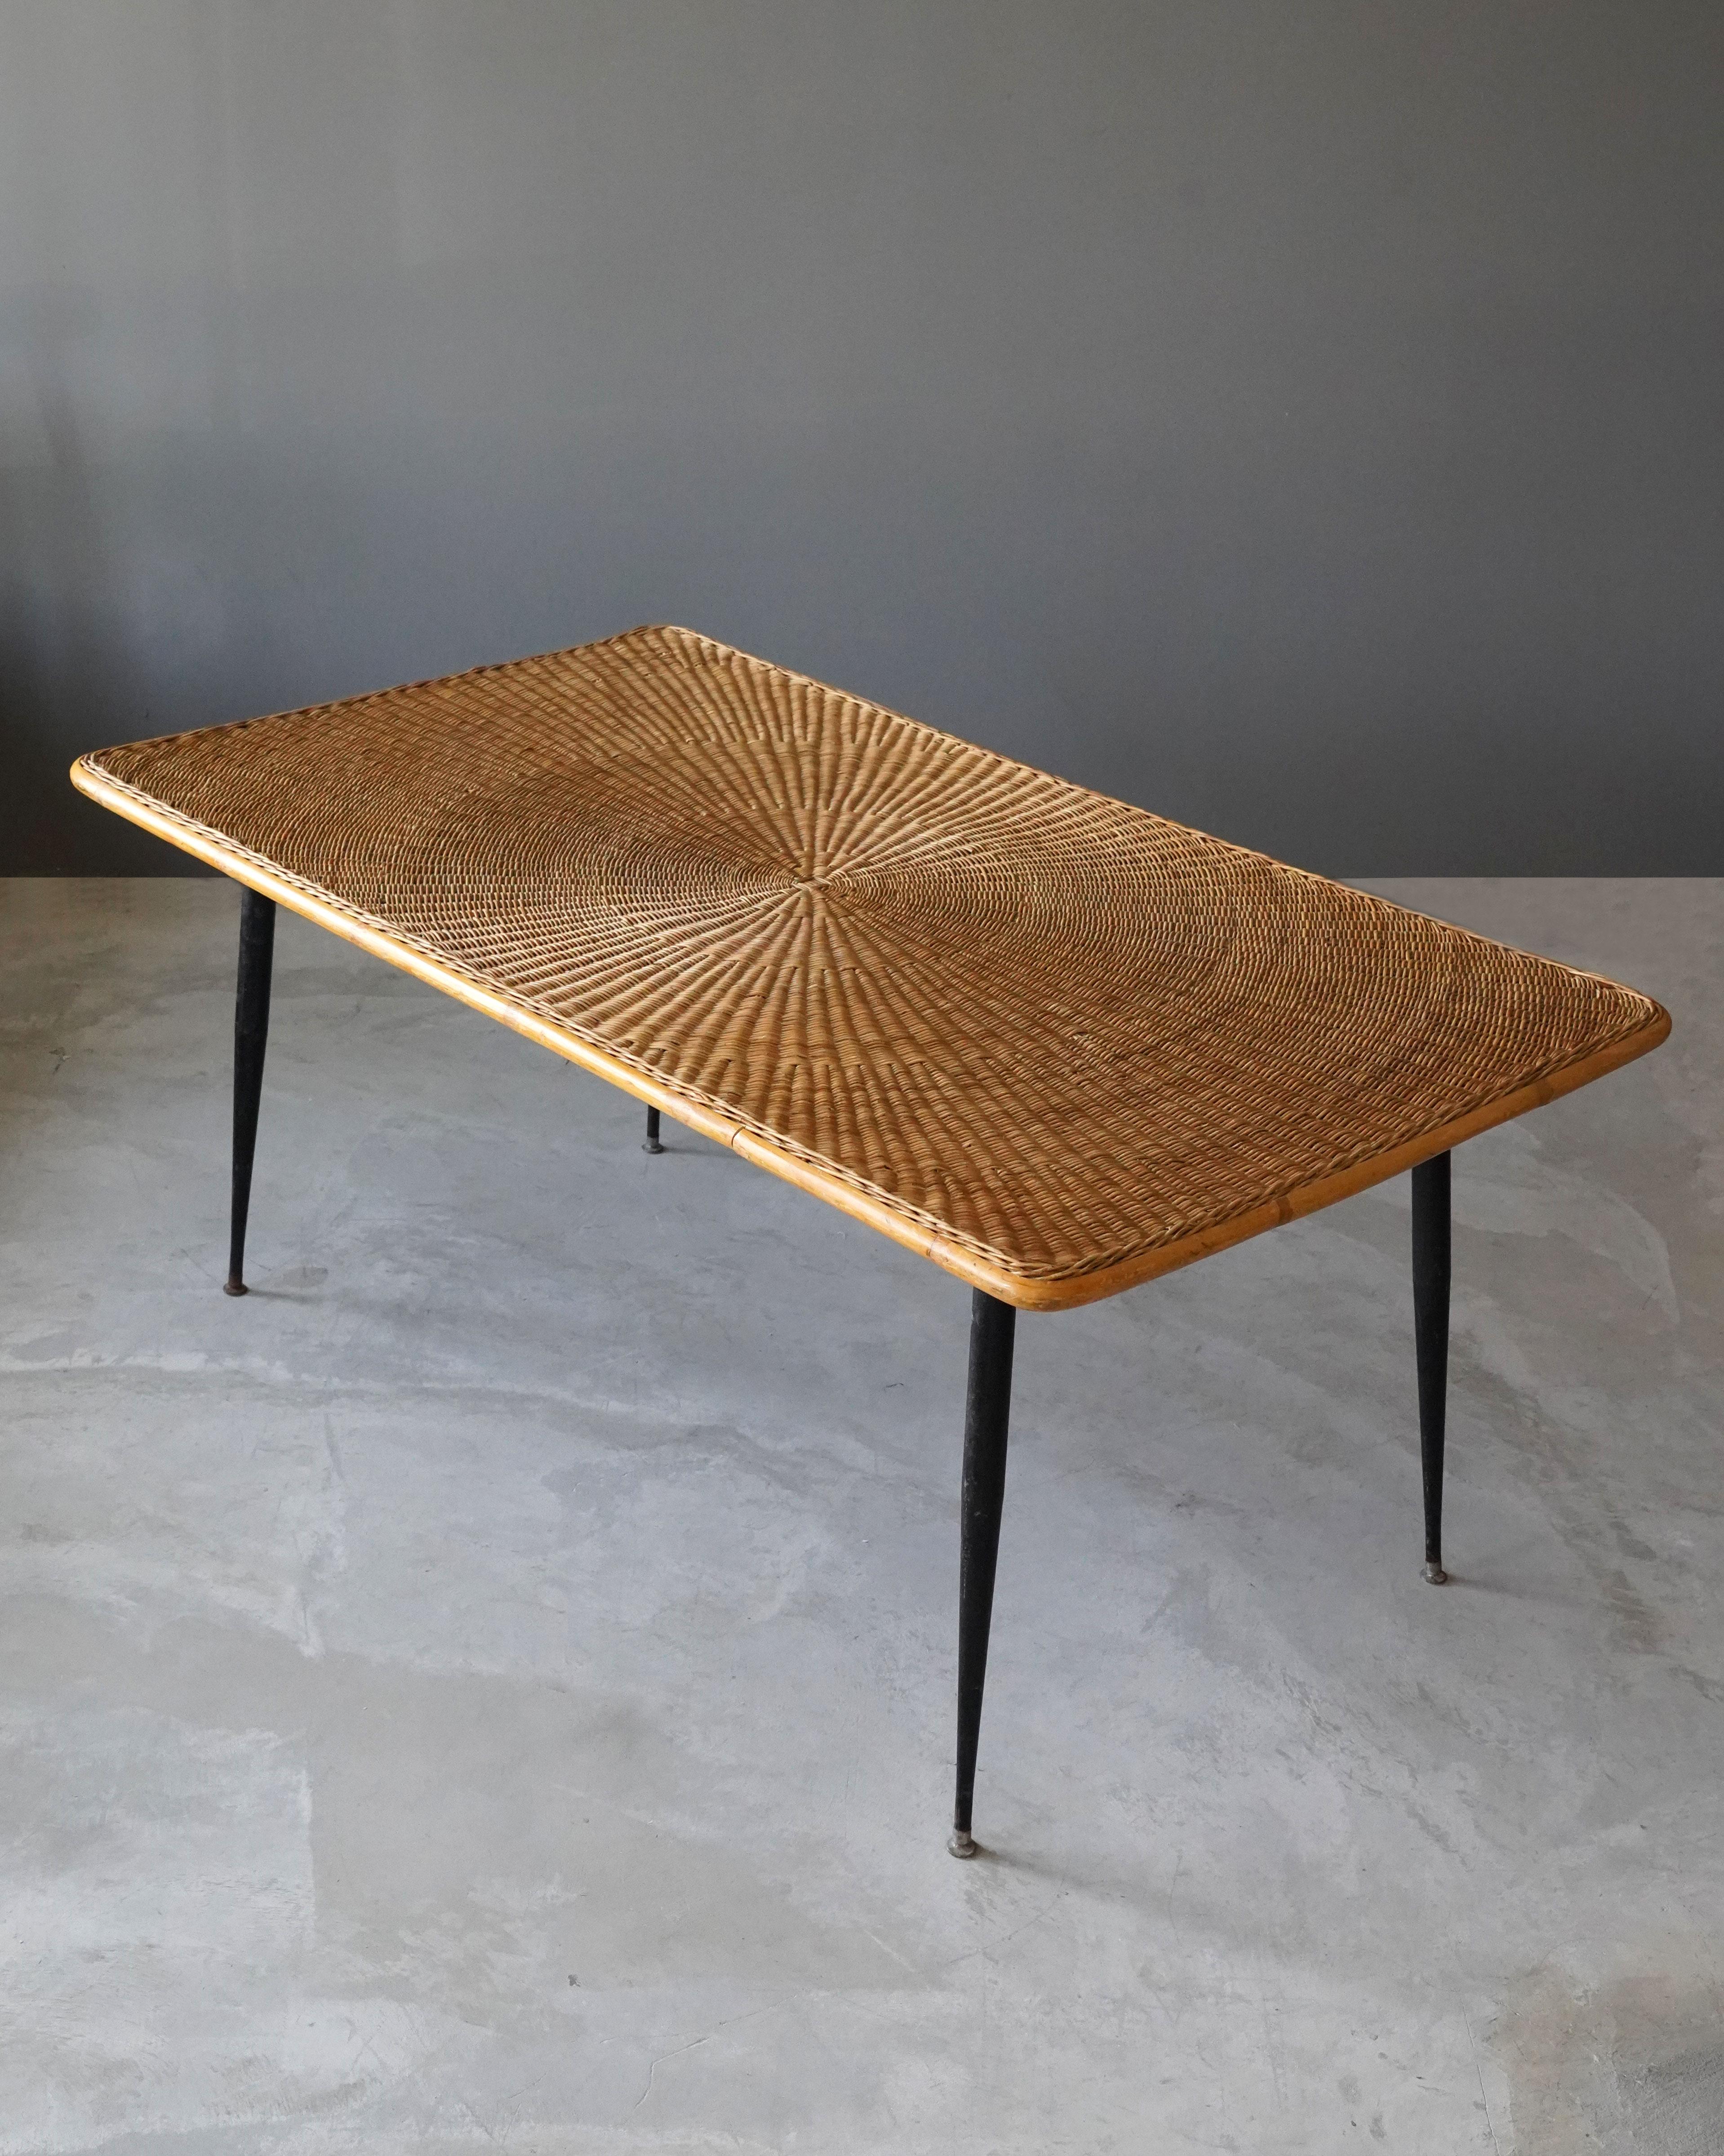 A dining table / dinette table / table. Designed and produced in America, 1950s. Woven rattan and lacquered steel.

Other designers of the period include Paul Frankl, Isamu Noguchi, George Nakashima, Edward Wormley, and Charles & Ray Eames.